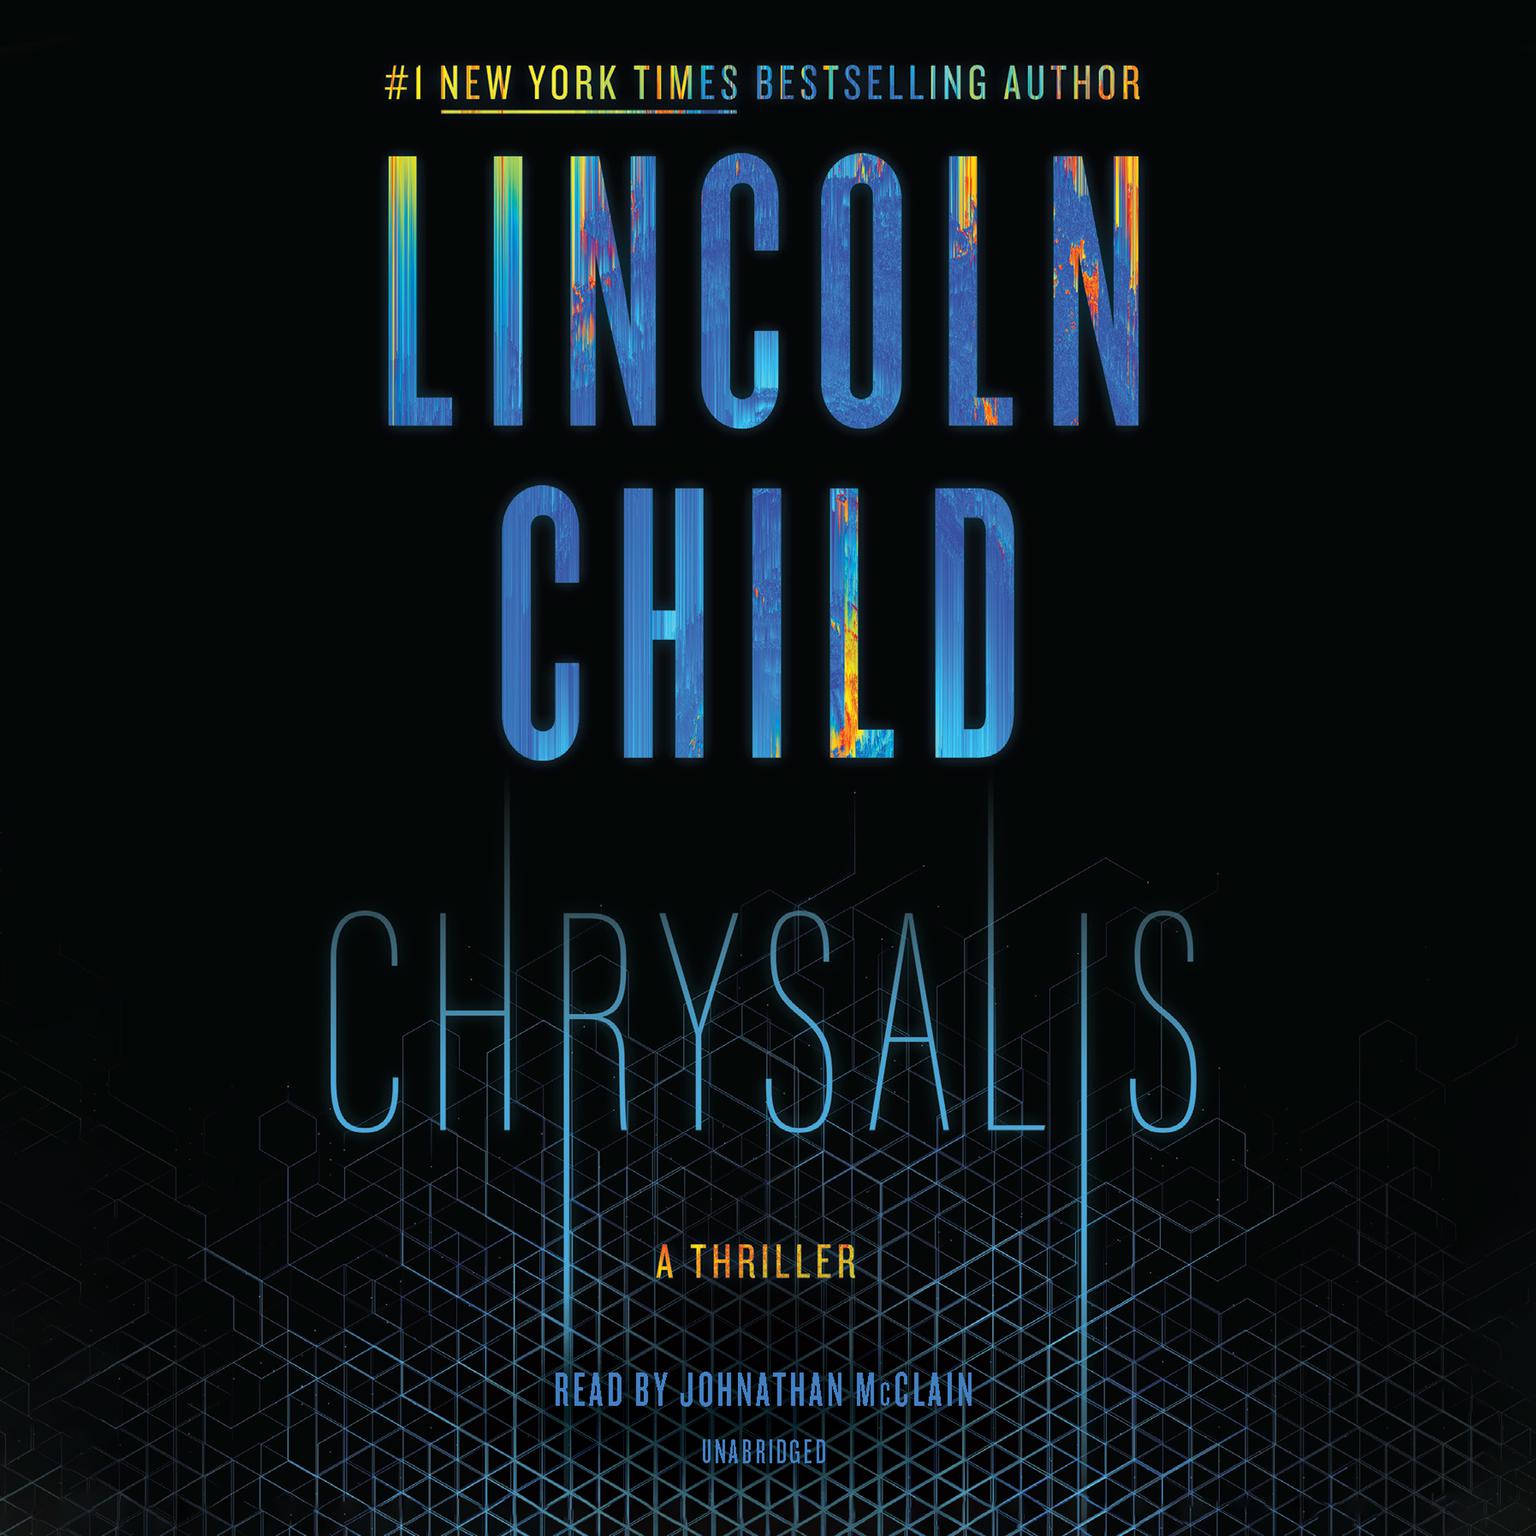 Chrysalis: A Thriller Audiobook, by Lincoln Child